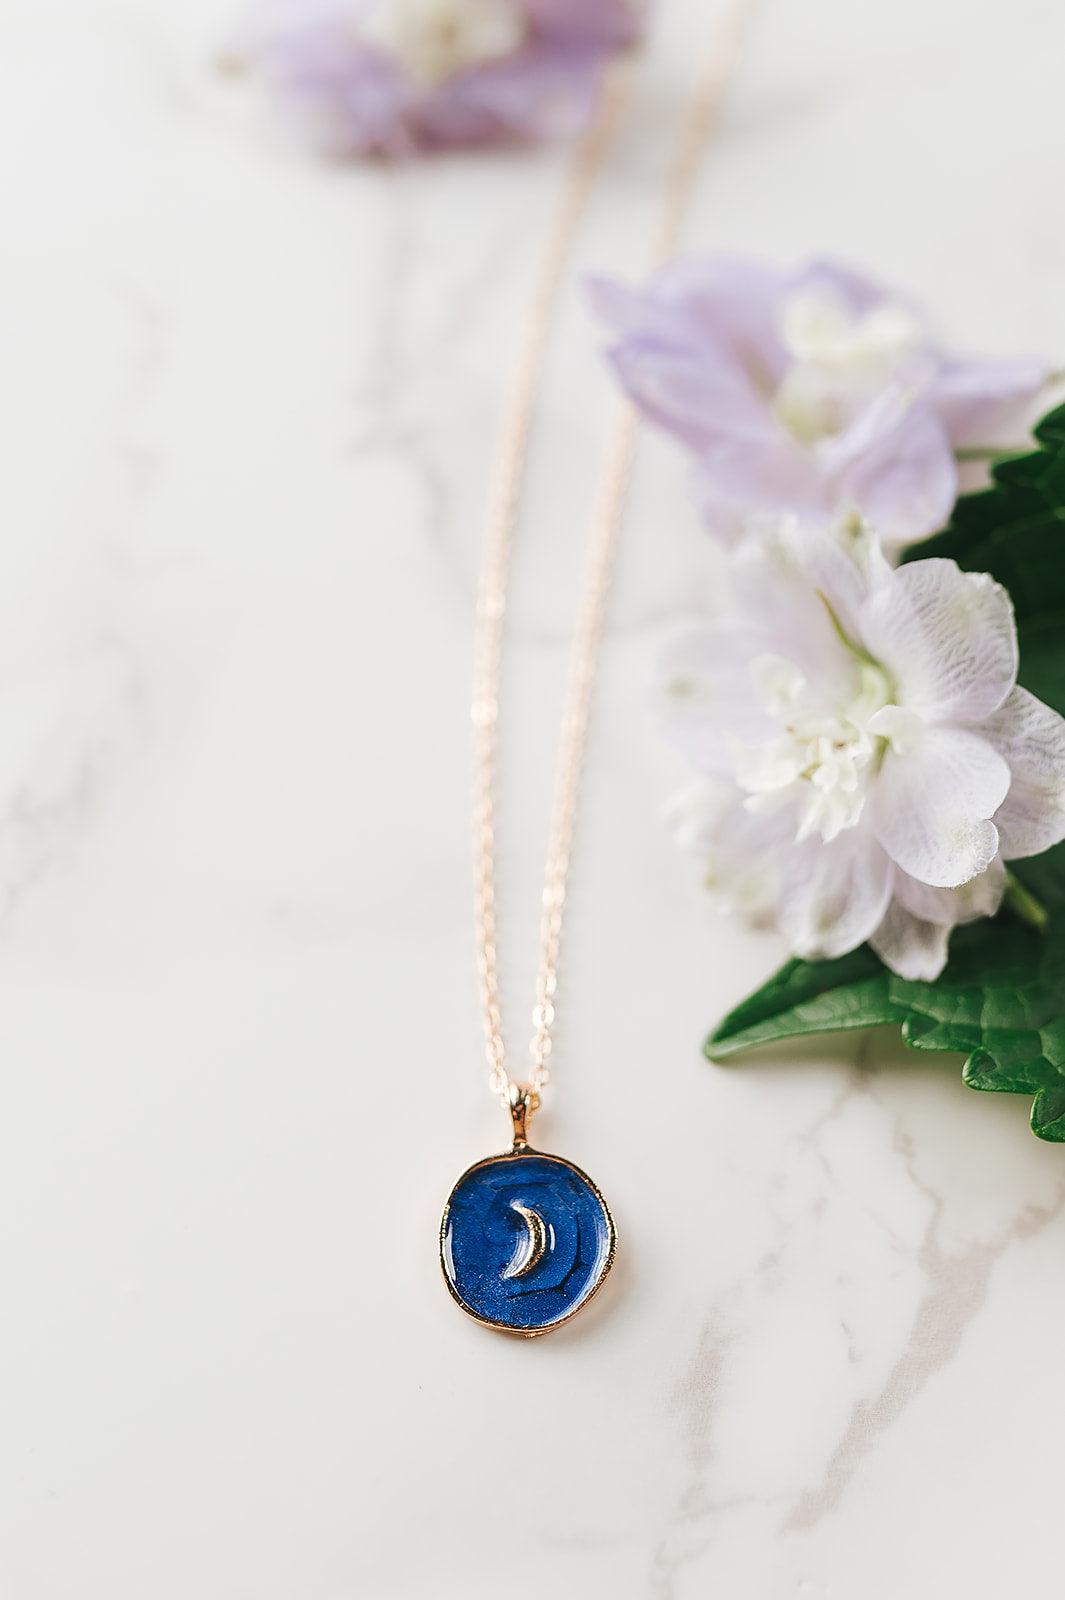 Blue Circle Gold Moon Necklace - Mkay Style